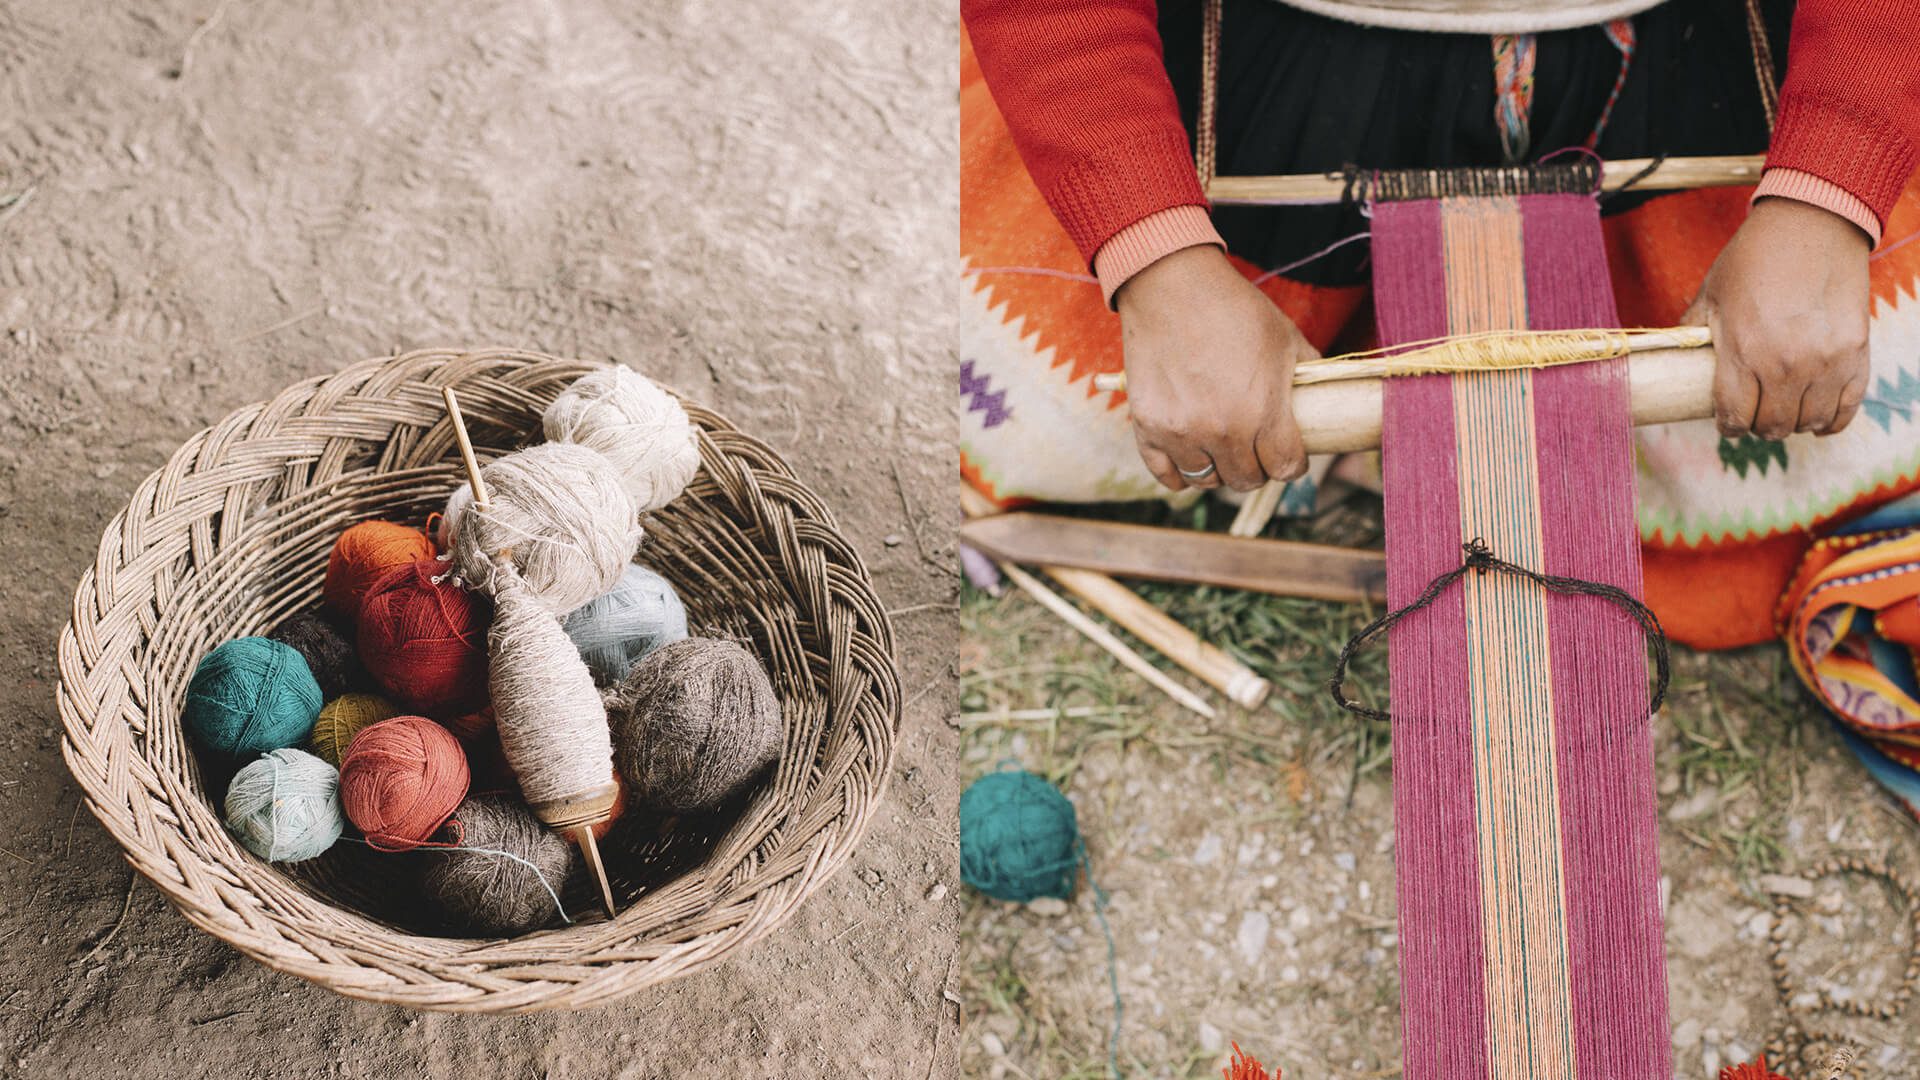 Visit the Patacancha community and learn to handmade spin, dye and weave wool. Create unique pieces with the artisans in a personalized way!